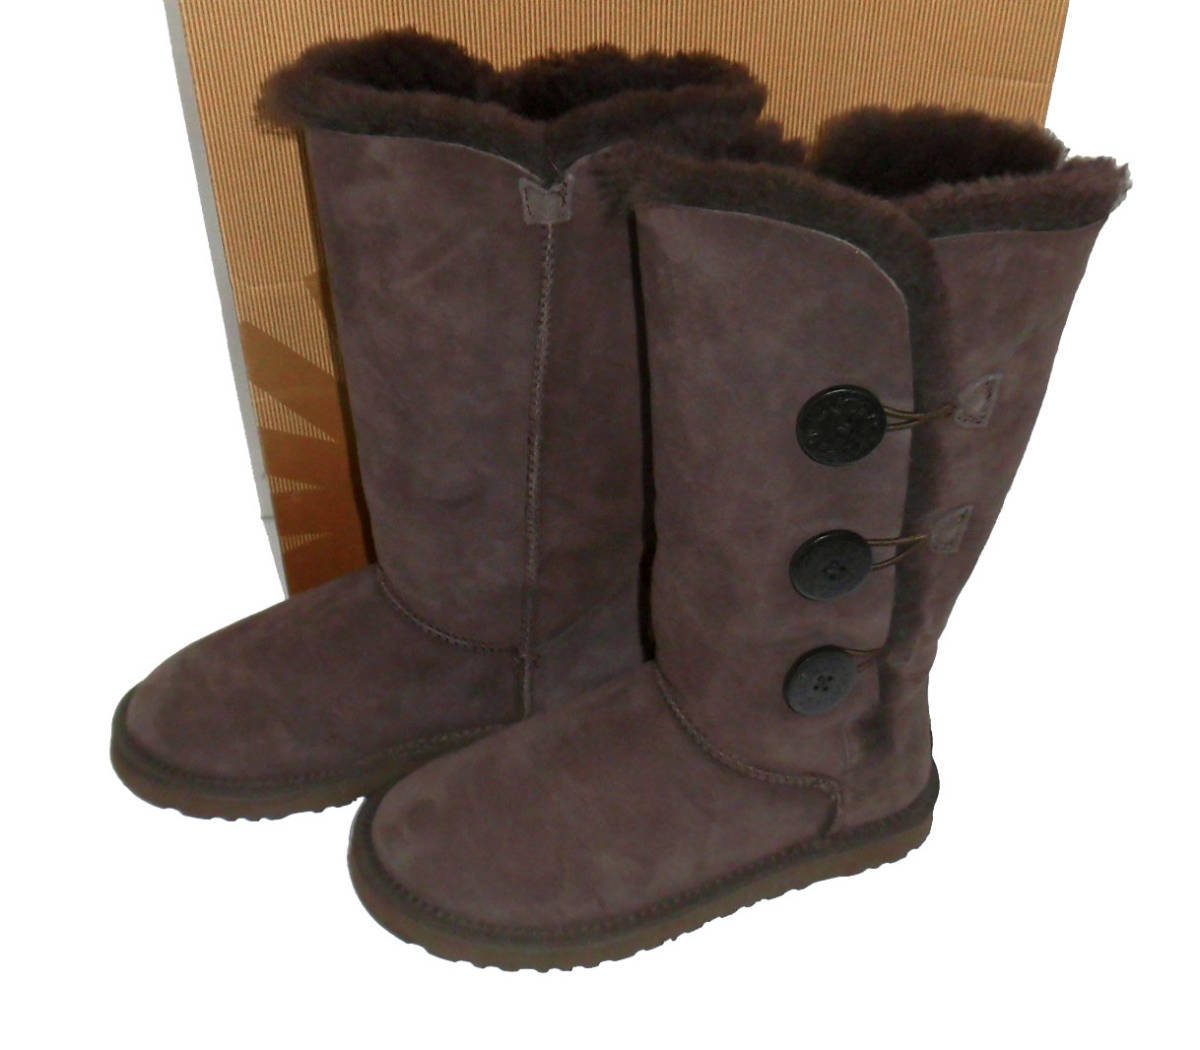 * use 1 times ultimate beautiful goods UGG Bailey Button Triplet UGG Bayley button tolip let 1873W boa mouton boots 